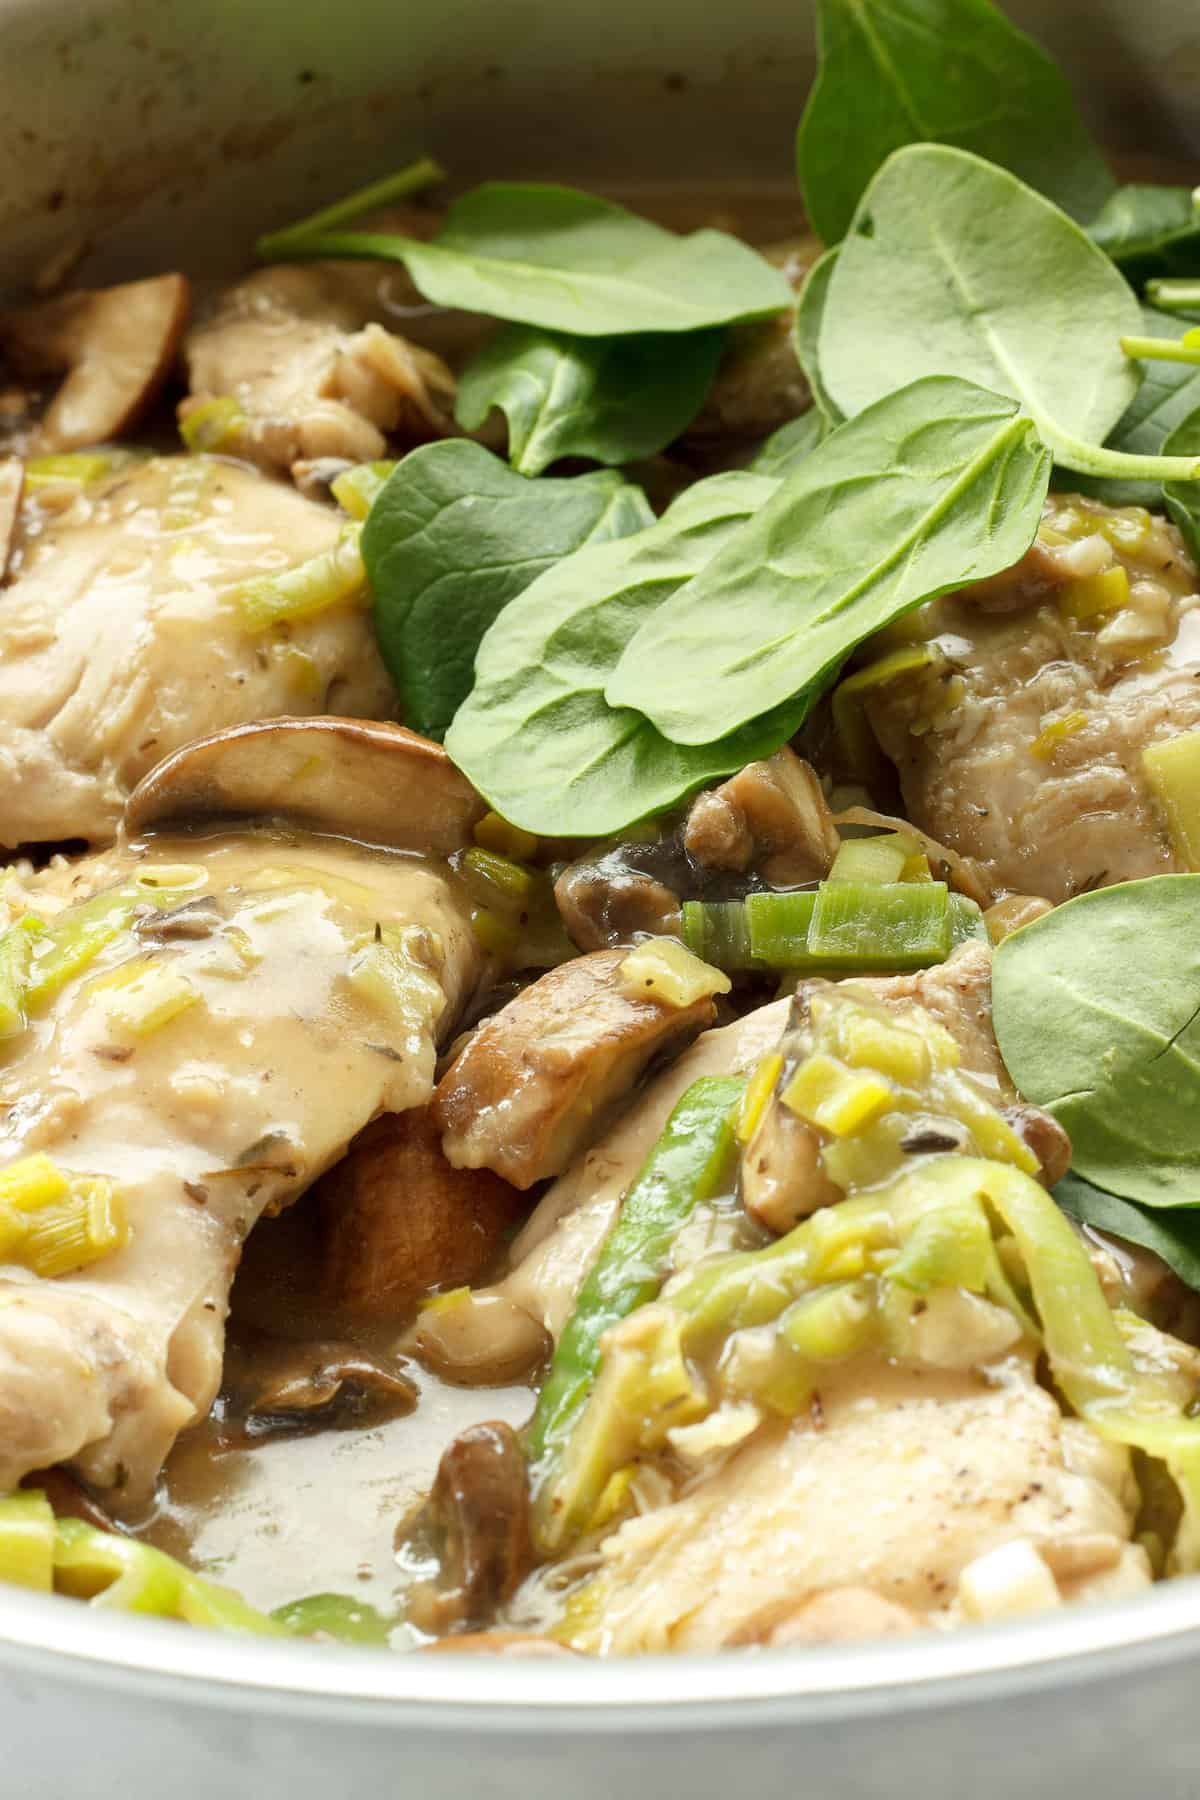 Instructions to make chicken with spinach and mushrooms.  Spinach added to the skillet at the end.